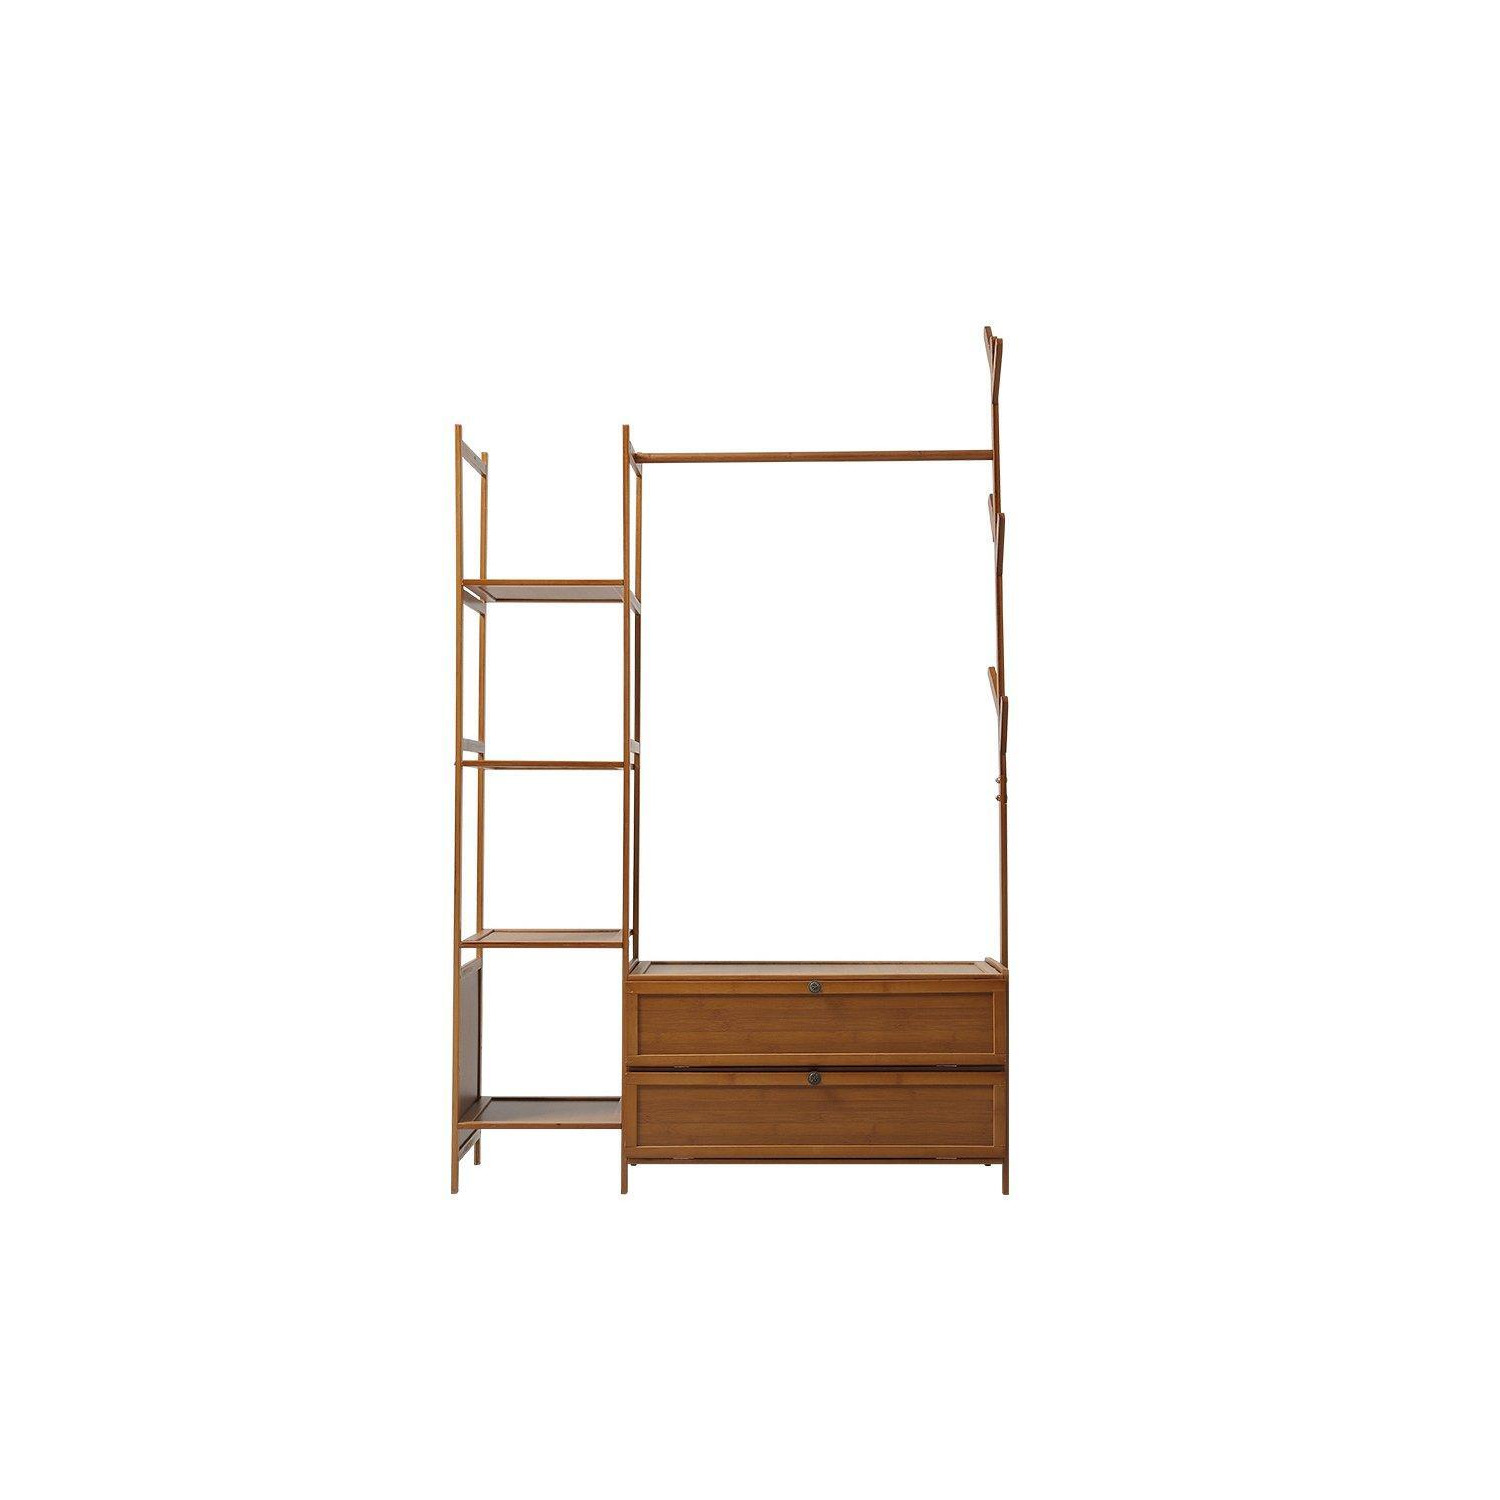 Freestanding Bamboo Clothes Rack with Storage Shelves - image 1